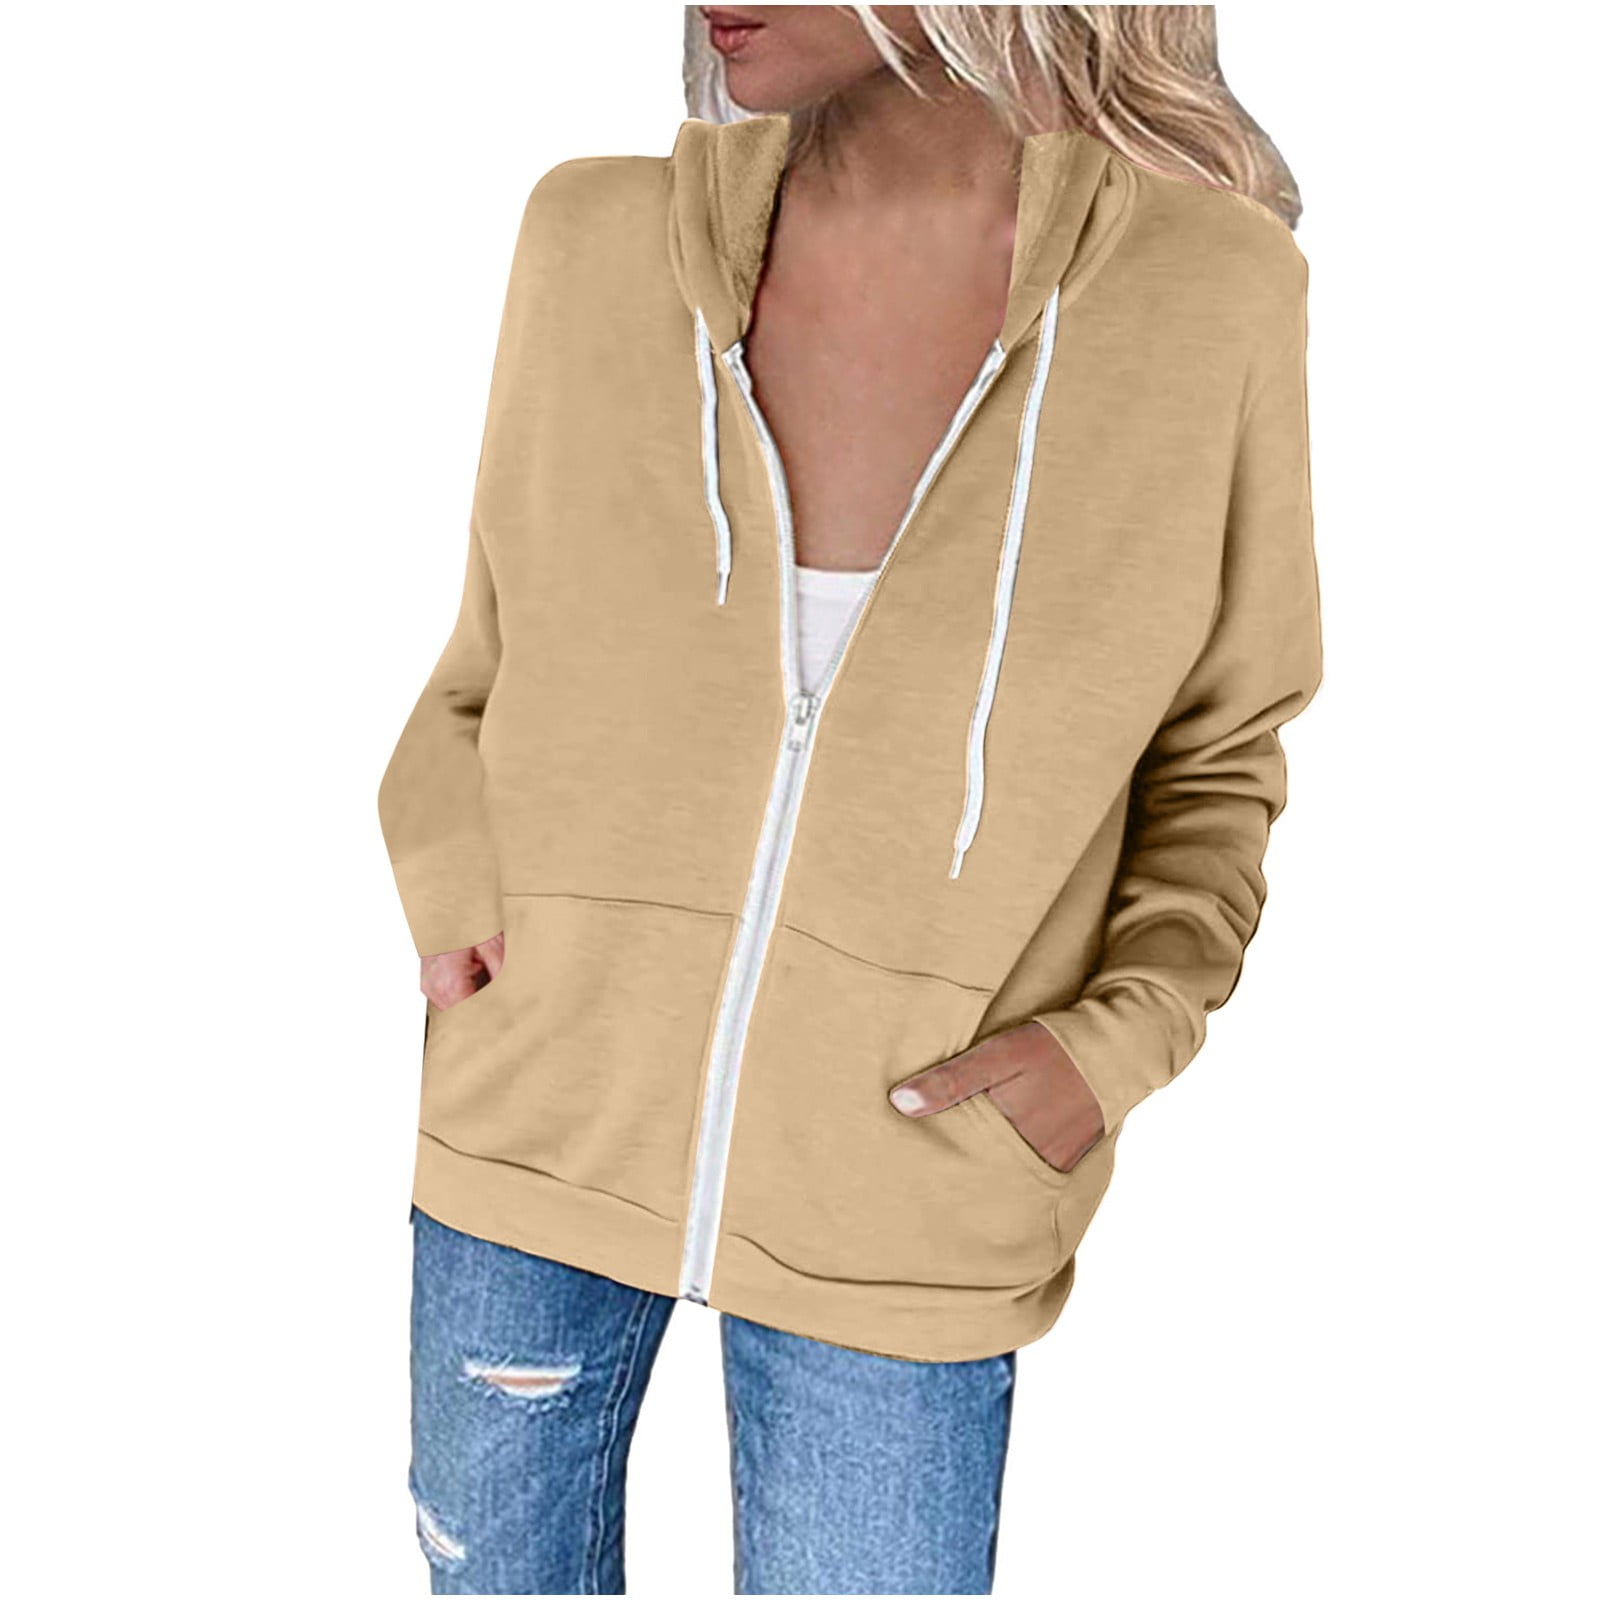 LYXSSBYX Womens Hoodies with Zippers Fashion Women Casual Hooded Slim ...